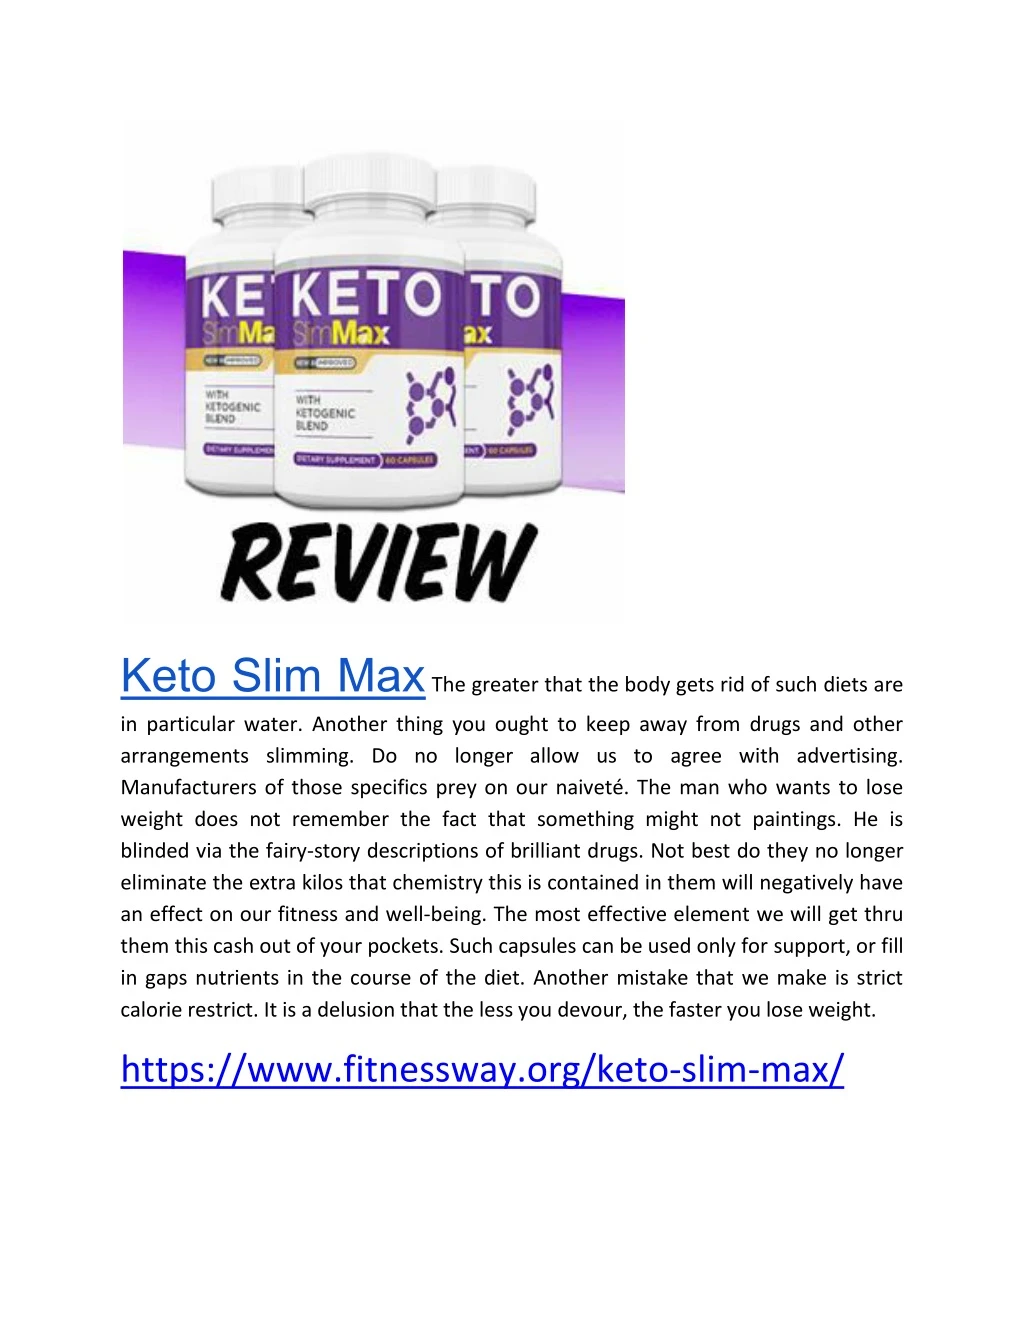 keto slim max the greater that the body gets